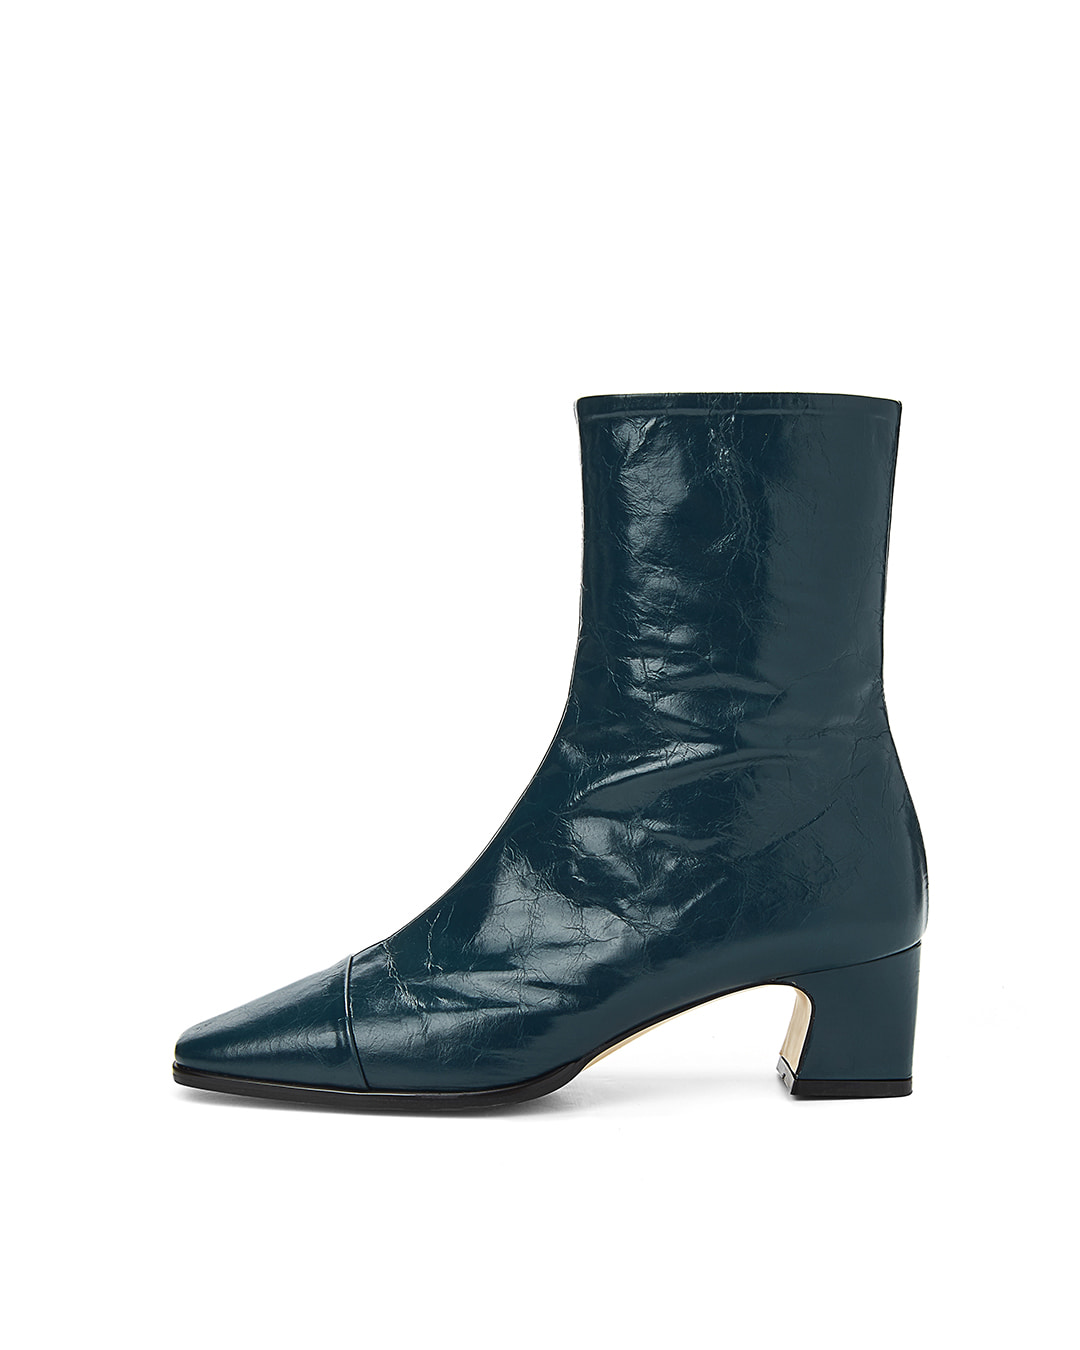 Newclassic Ankle Boots - Green